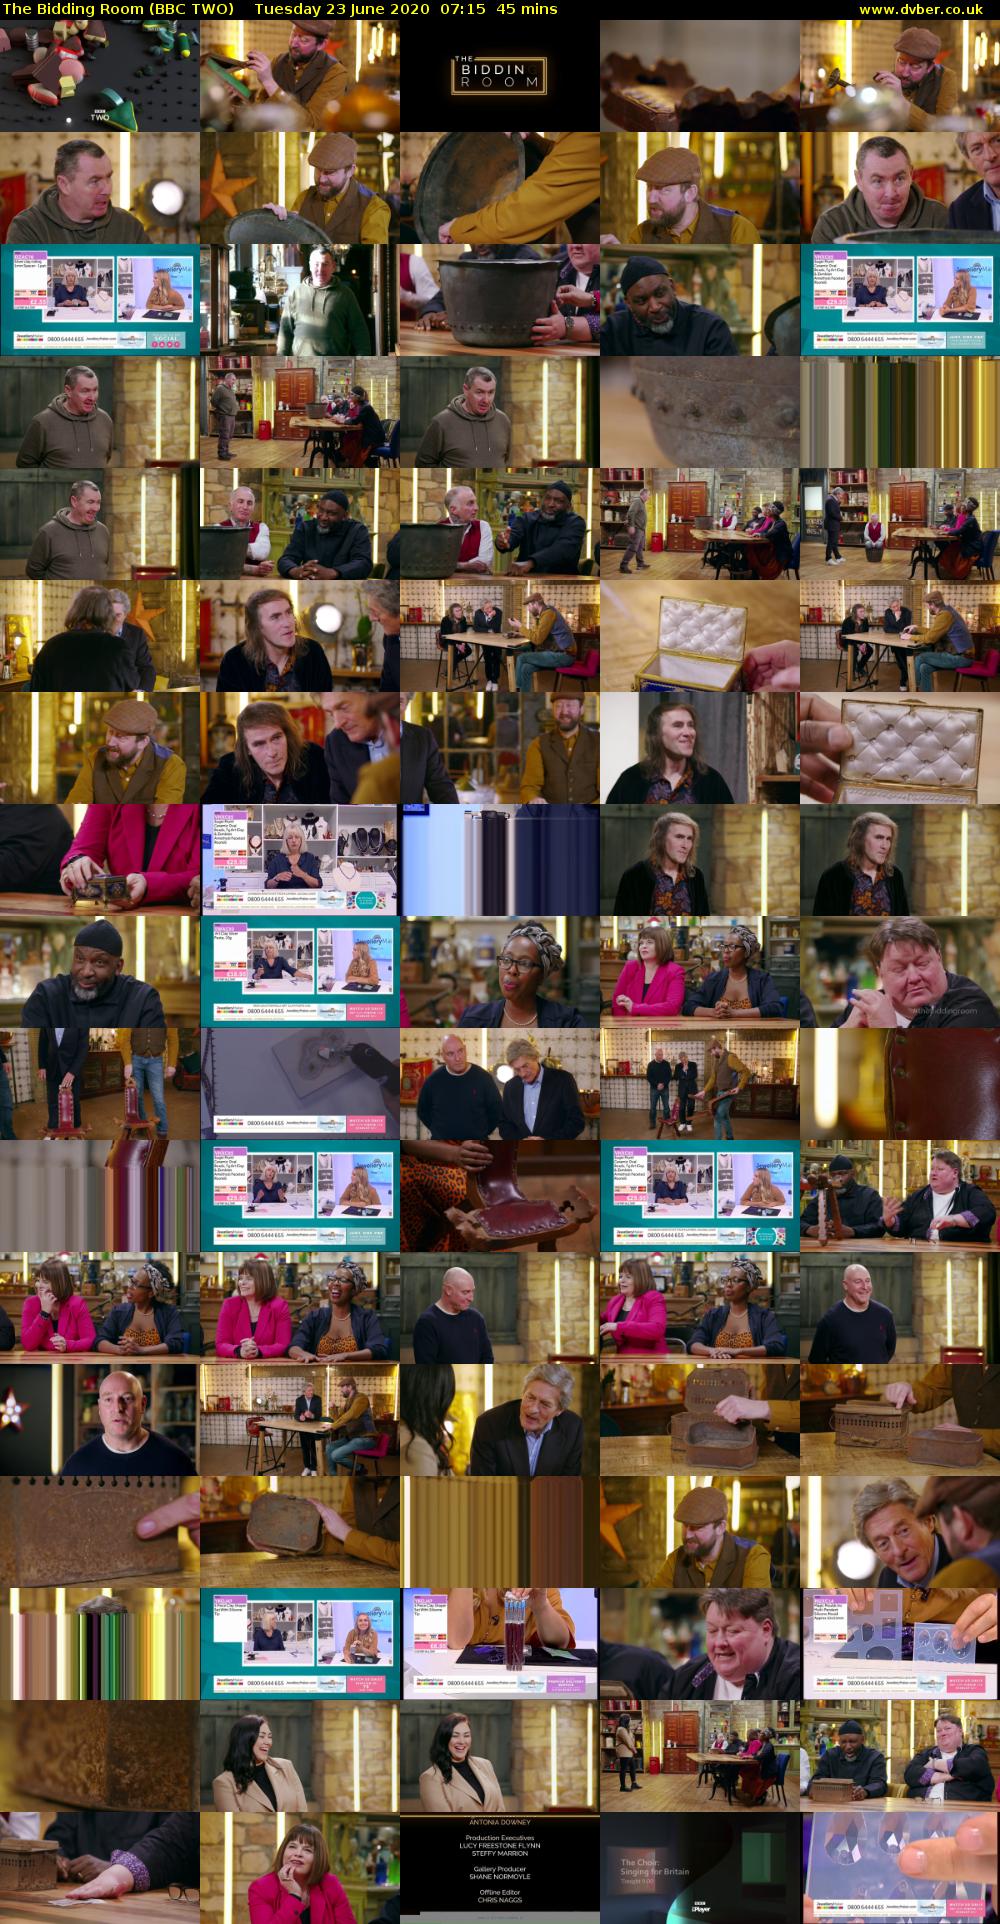 The Bidding Room (BBC TWO) Tuesday 23 June 2020 07:15 - 08:00